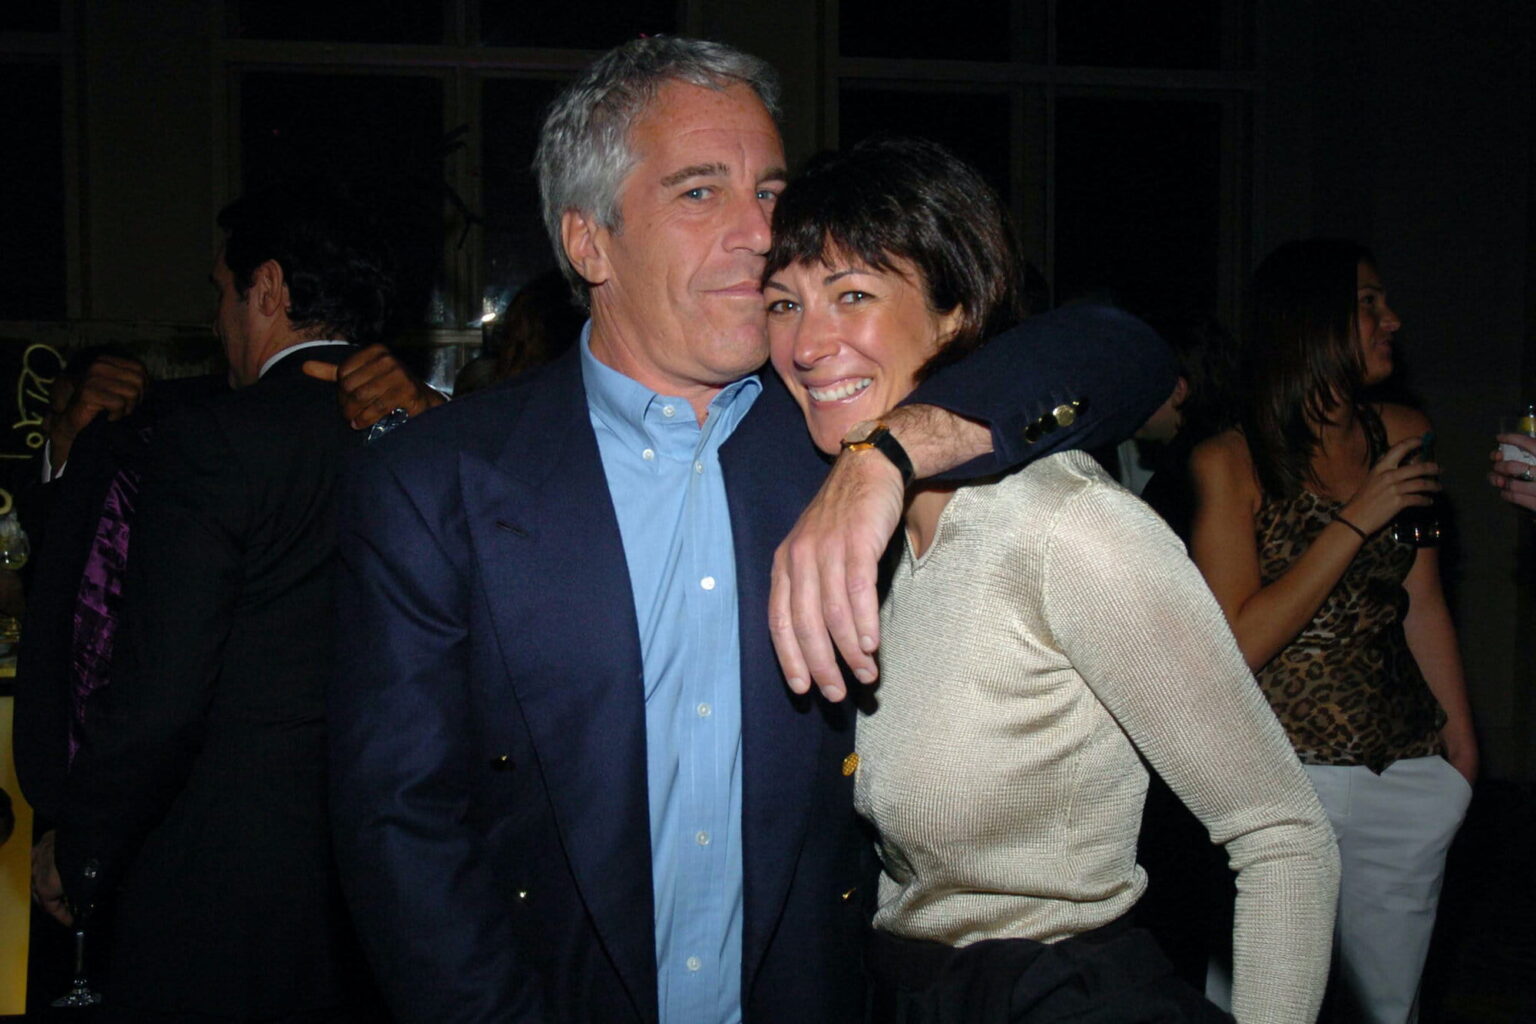 Known for her relationship with Jeffrey Epstein, Ghislaine Maxwell has finally began her trial. Now will she reveal other sex trafficking insiders?